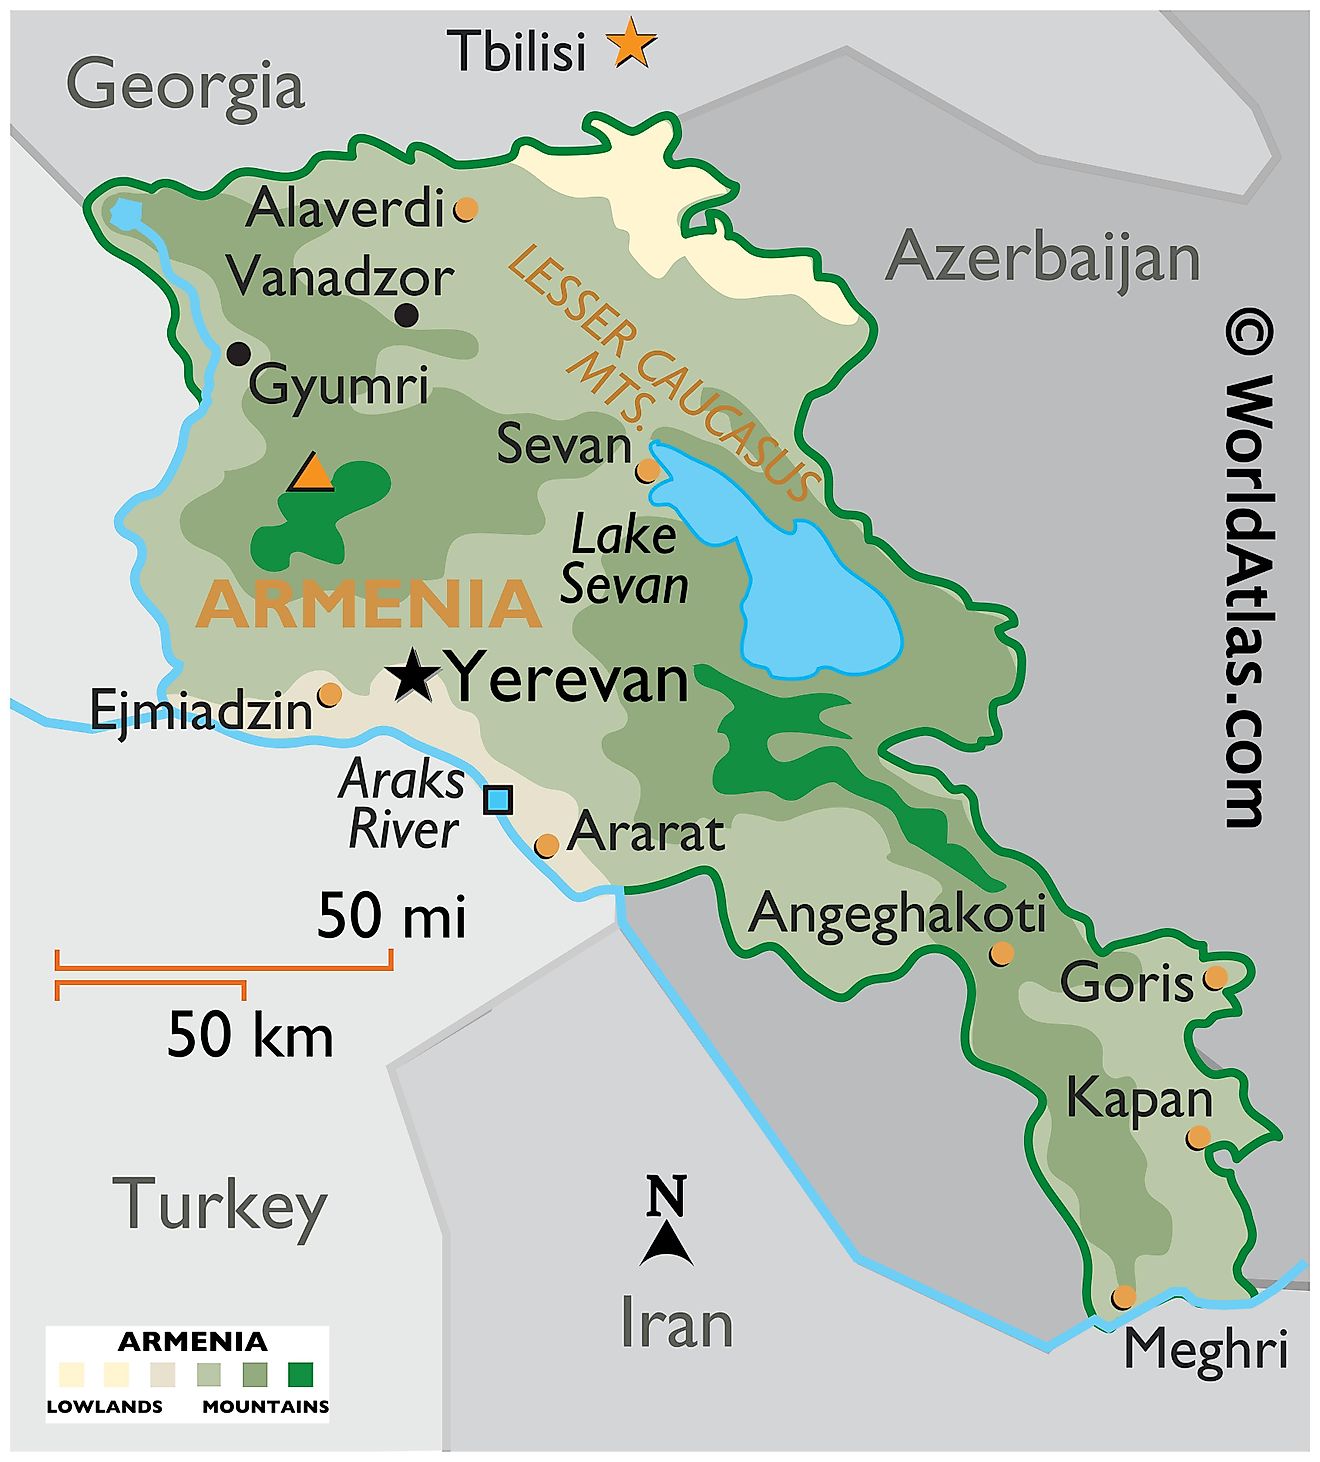 Physical Map of Armenia showing state boundaries, relief, major rivers, mountain ranges, important cities, etc.